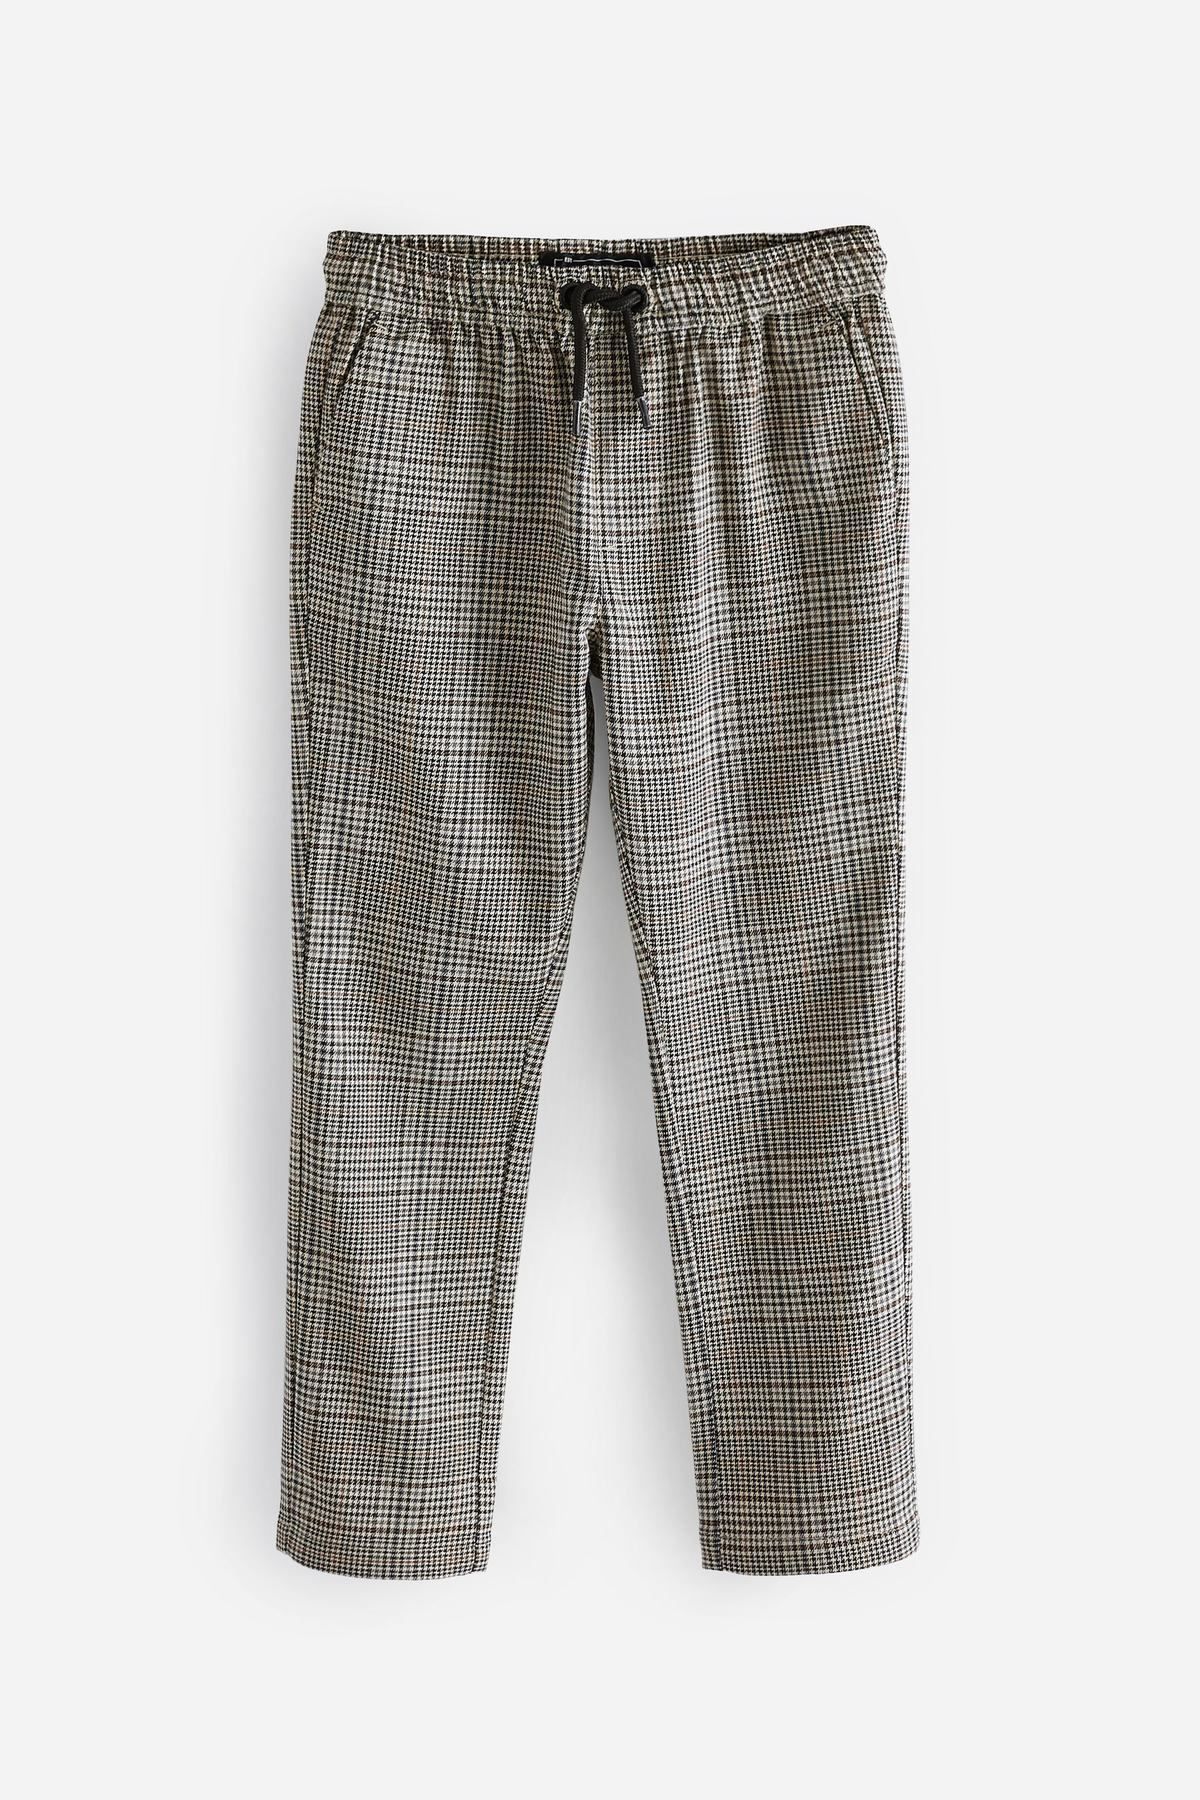 Shop Womens Check Trousers From Next UK  DealDoodle